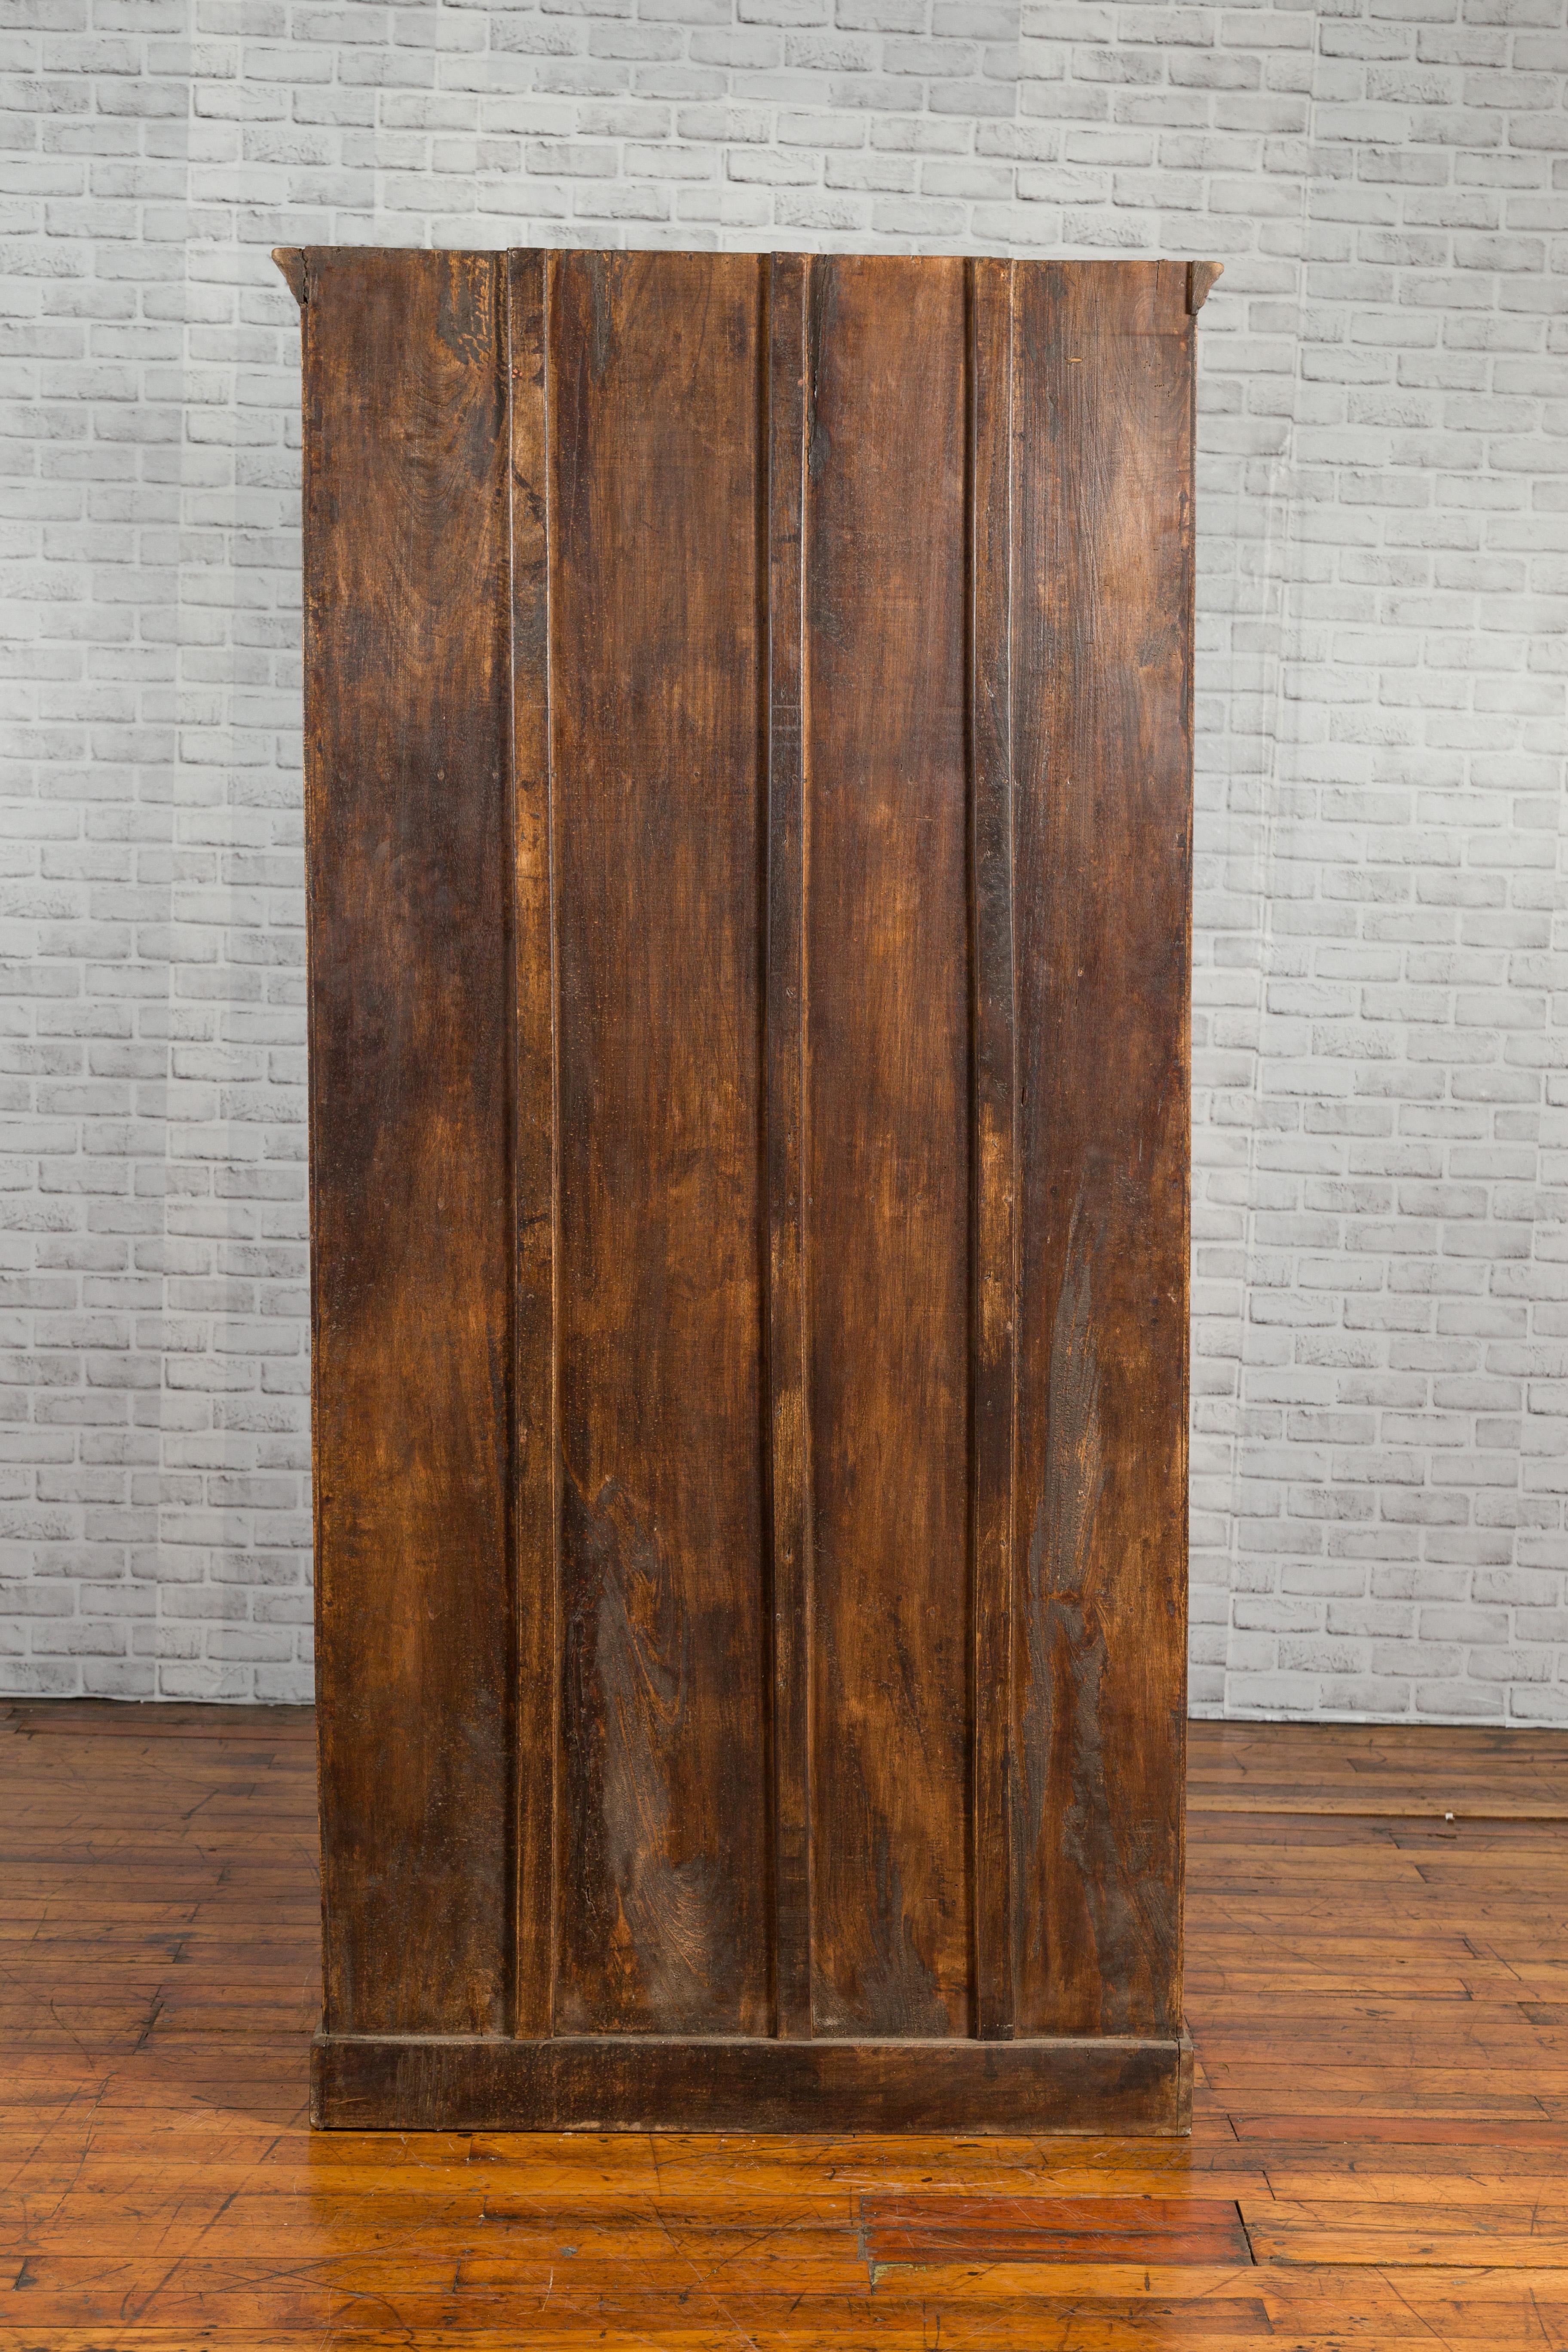 An Indian 19th century carved sheesham wood cabinet from Gujarat, with arching doors and iron hardware. Created in Western India during the 19th century, this this tall cabinet is made with a typical Indian wood called sheesham wood, which is